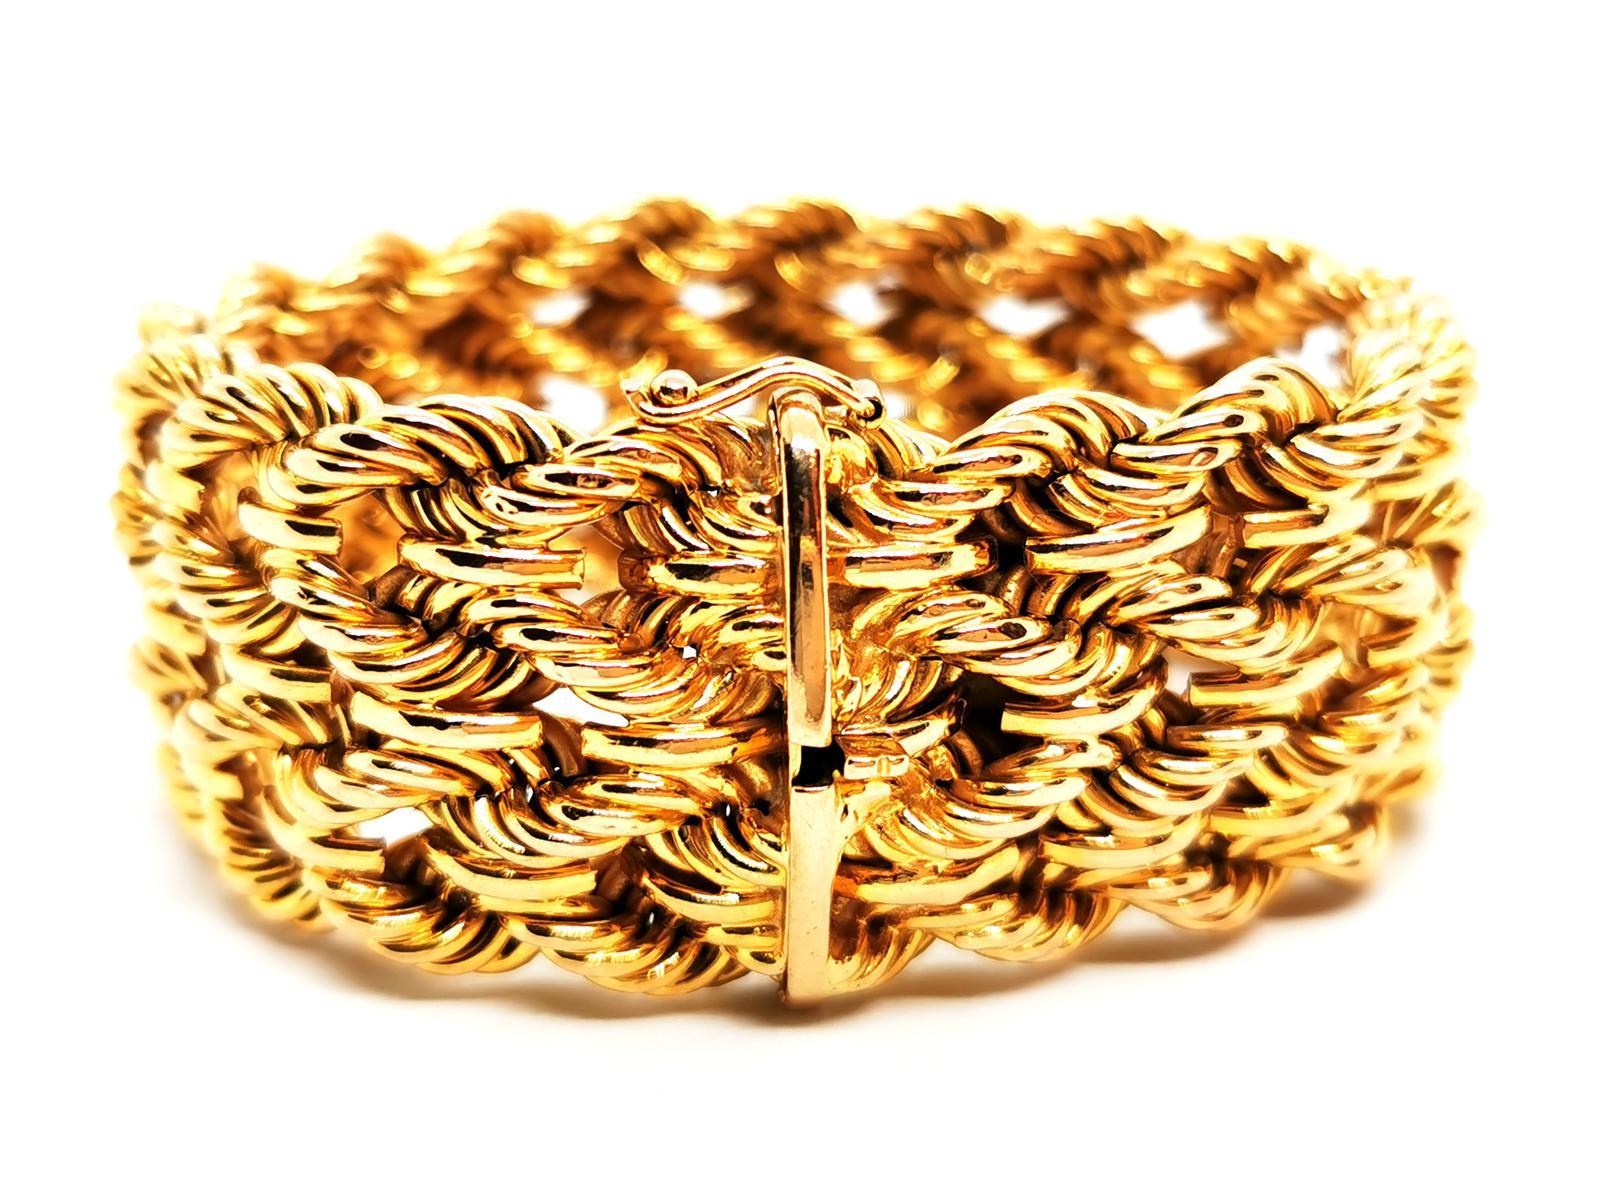 Bracelet cuff in yellow gold 750 thousandths (18 carats). twisted pattern. length: 19 cm. width: 2.75 cm. clasp tongue with eight safety. total weight: 76.72g. eagle head hallmark. excellent condition.

